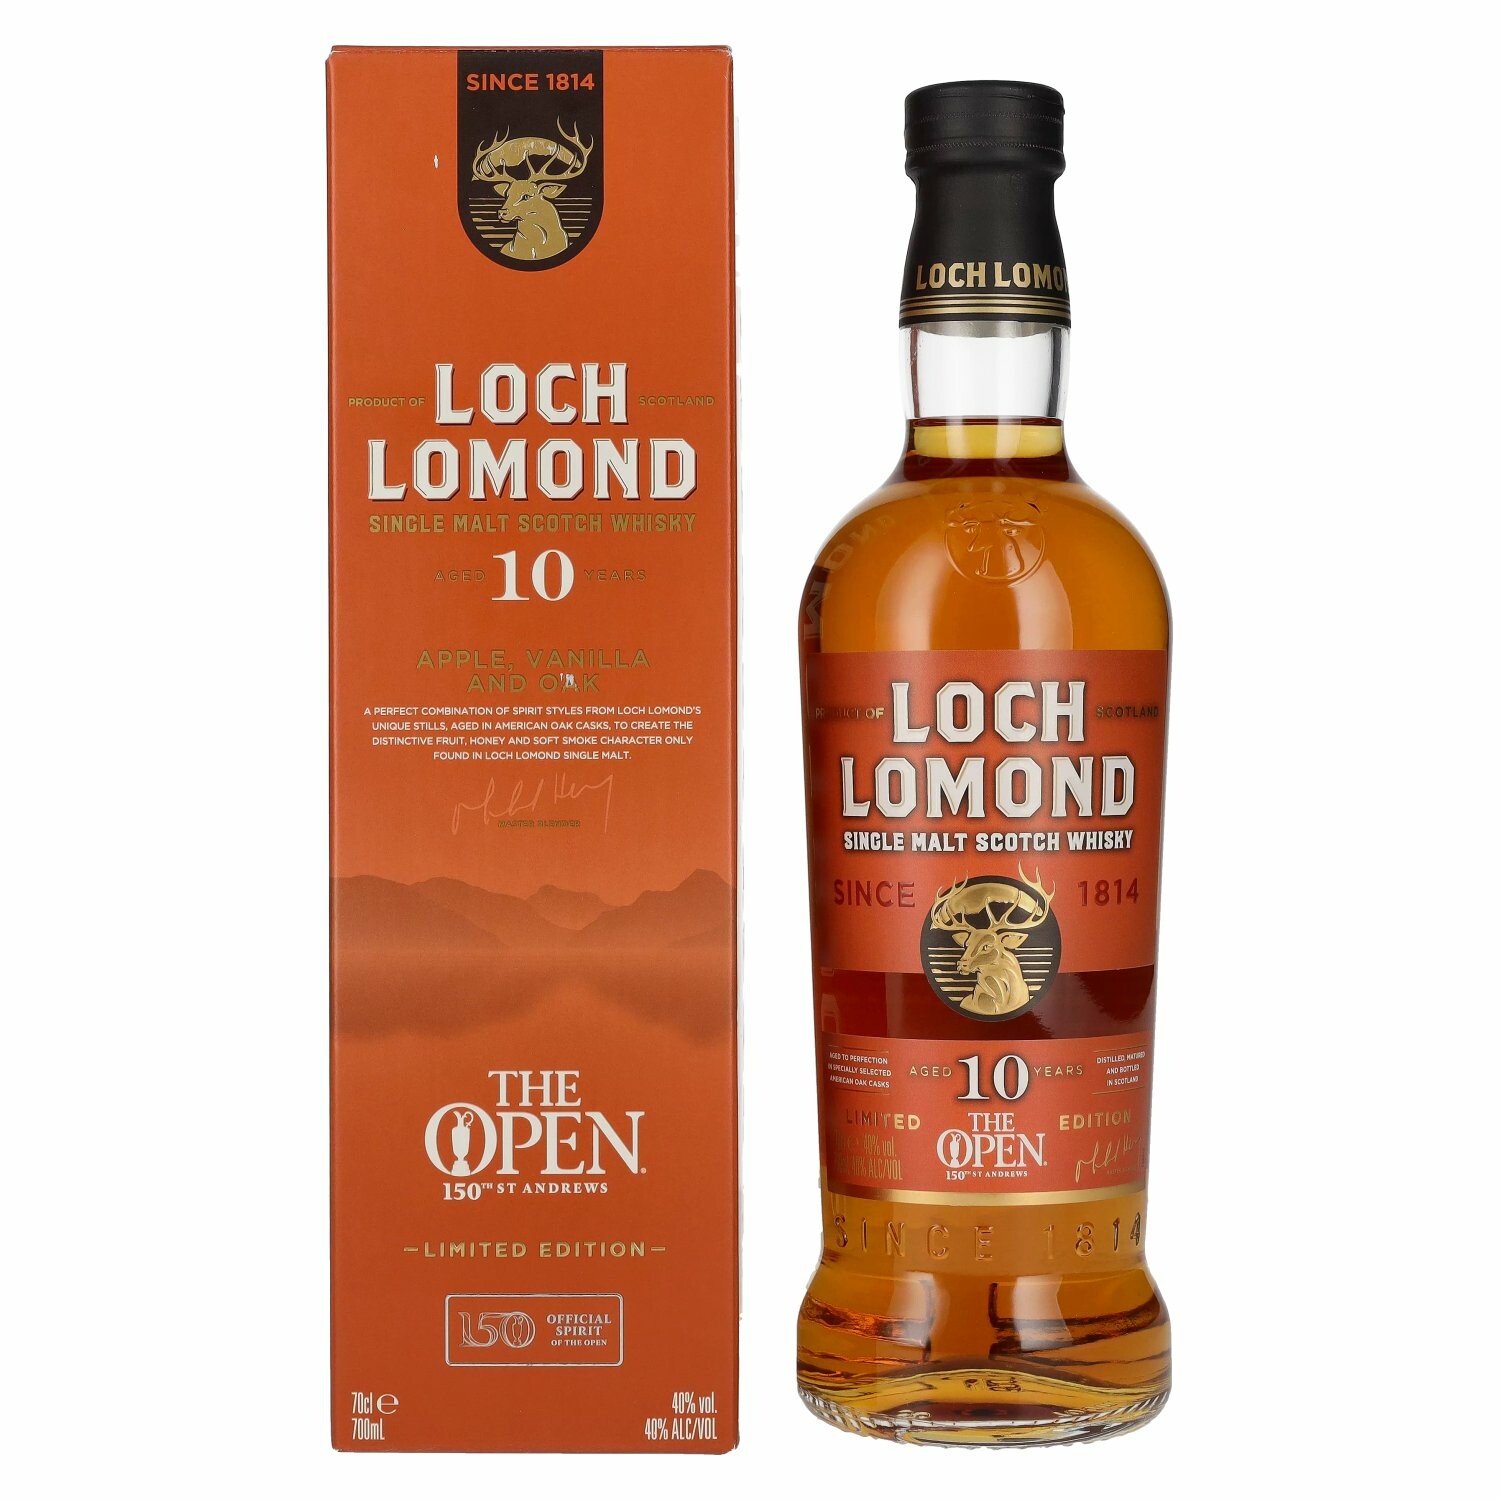 Loch Lomond 10 Years Old THE OPEN 150th St. Andrews Limited Edition 40% Vol. 0,7l in Giftbox